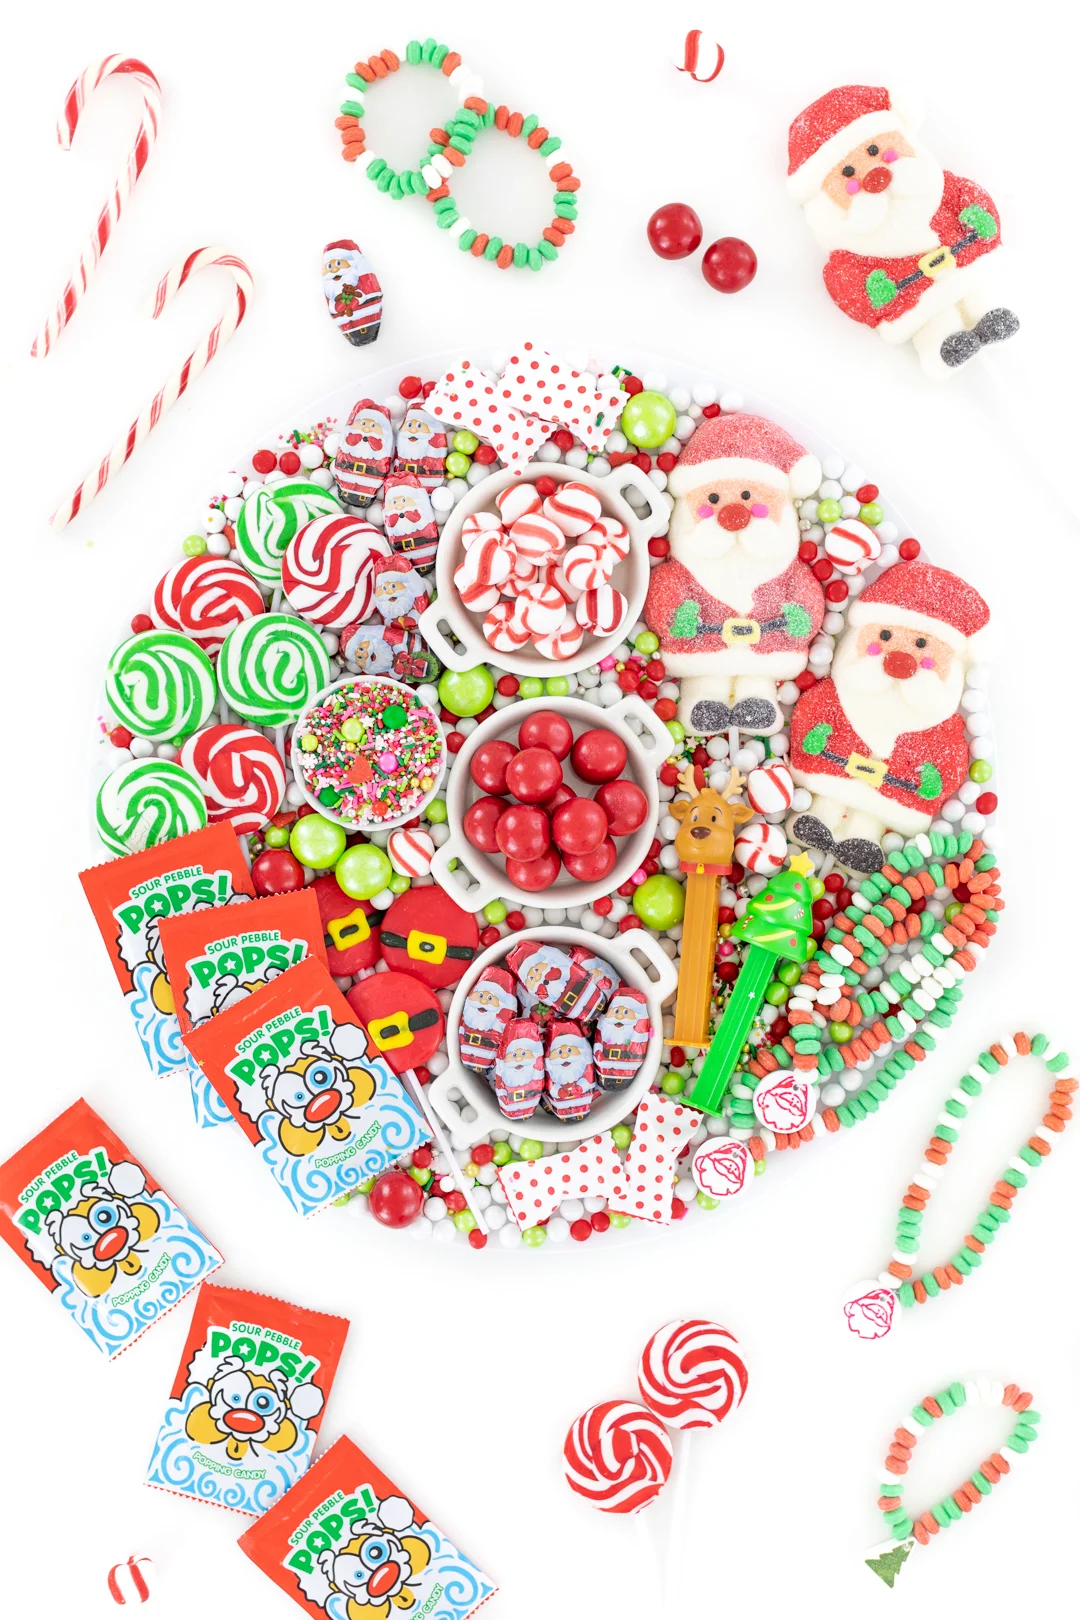 fun christmas candy board with red and green candies. flat lay style photo with candies displayed all over the table.